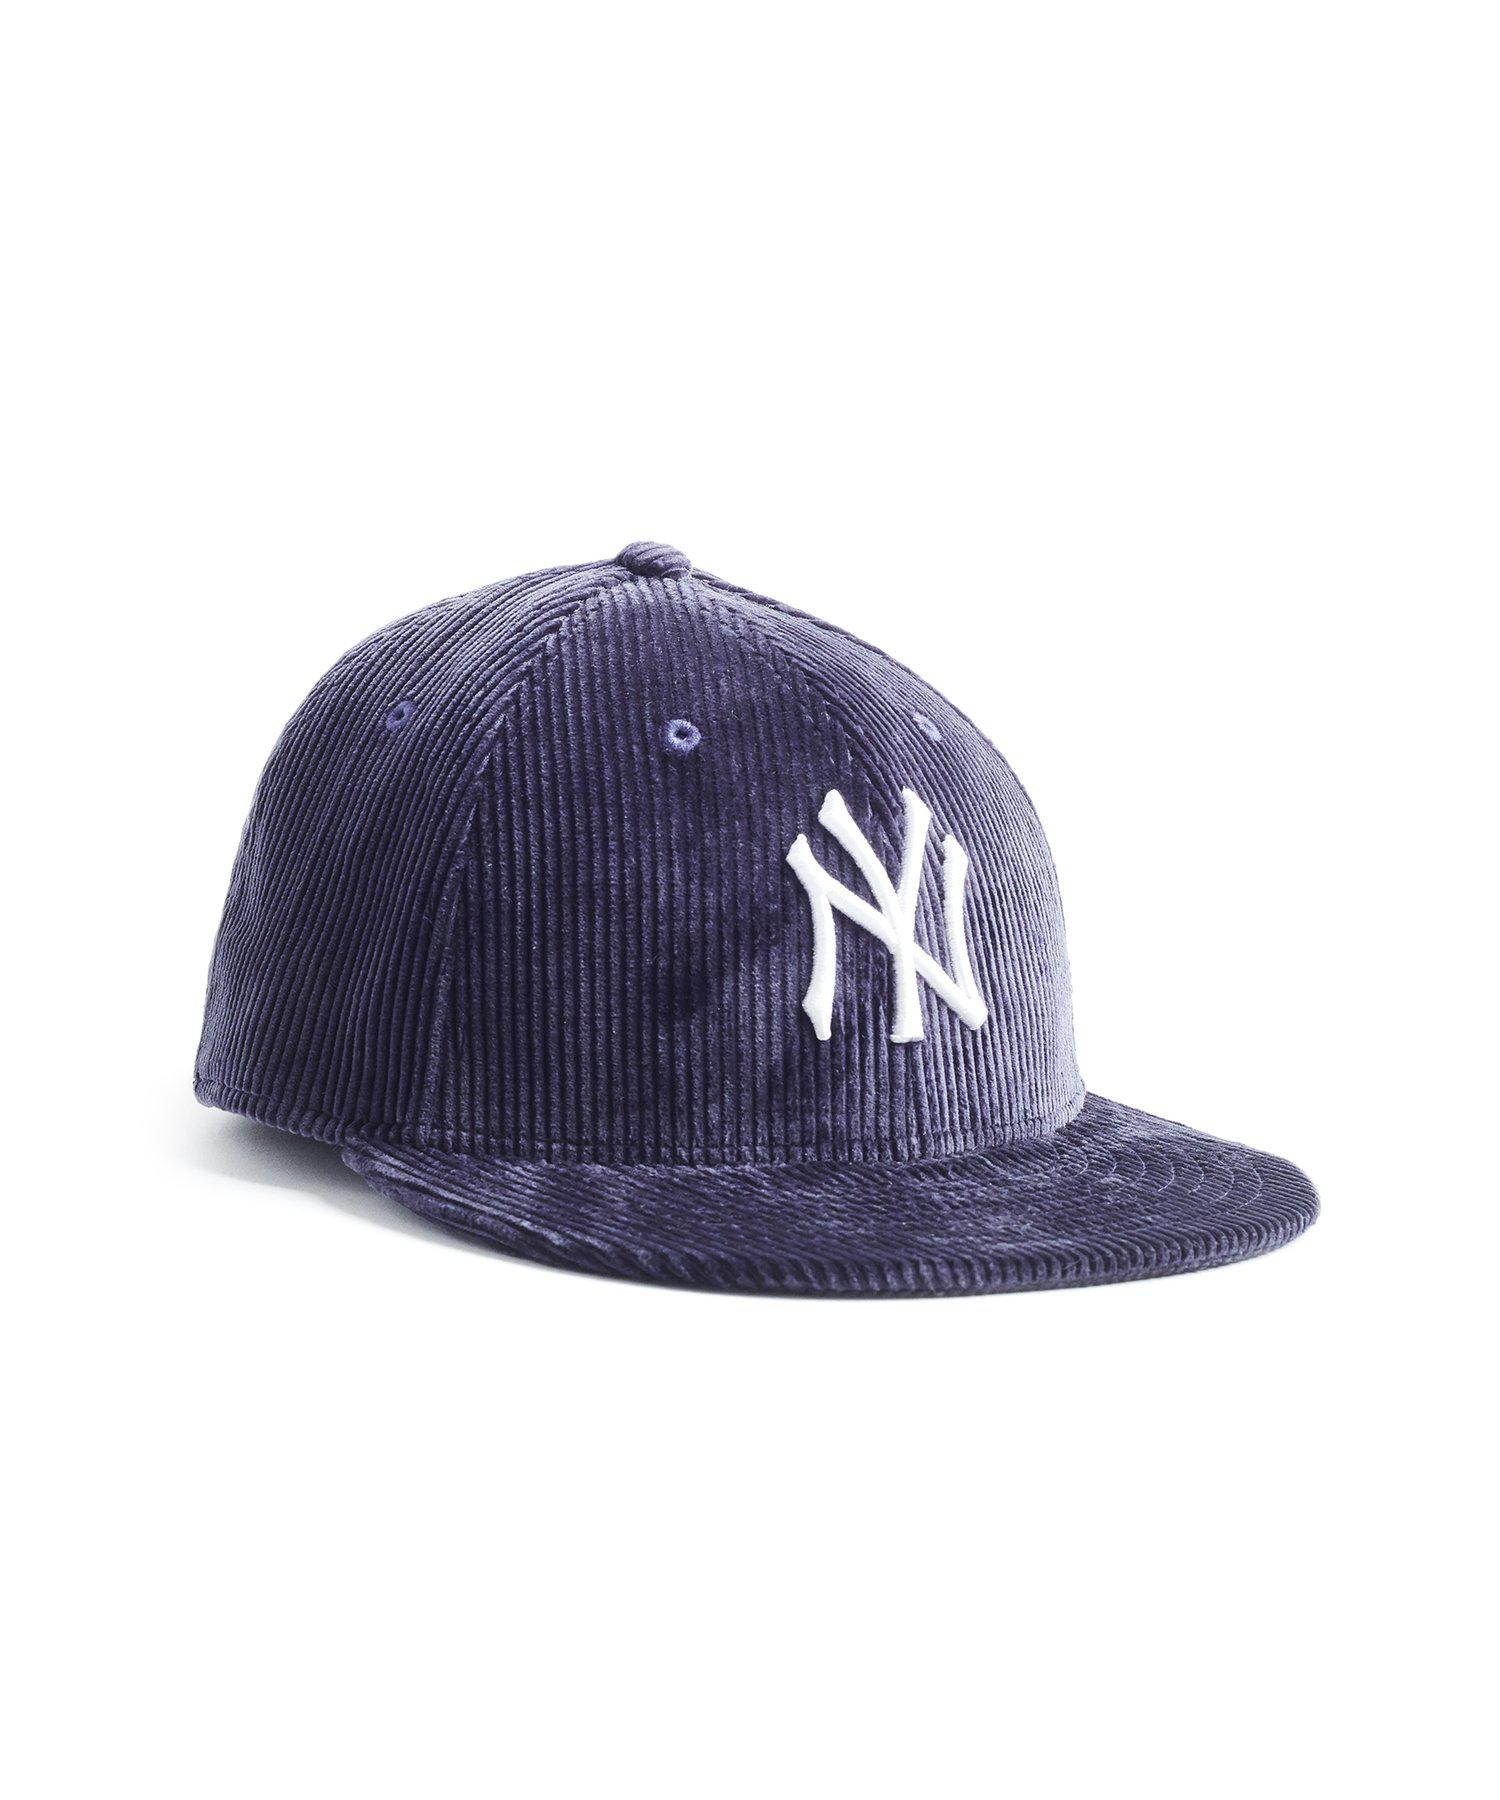 Sale > exclusive yankee fitted hats > in stock